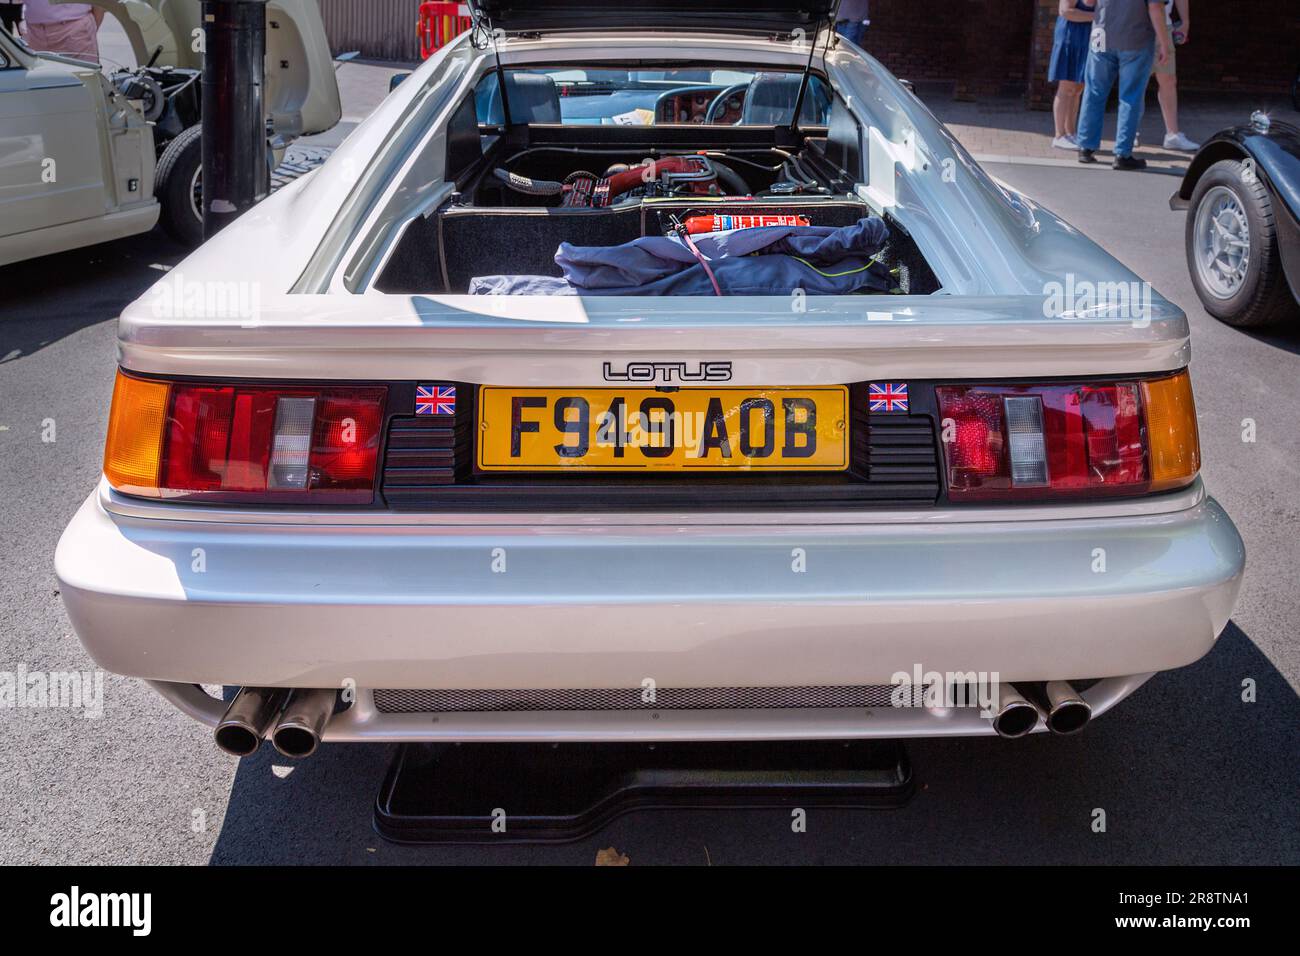 Rear view of a 1980's Lotus Esprit Turbo with the engine compartment opened up. Stock Photo